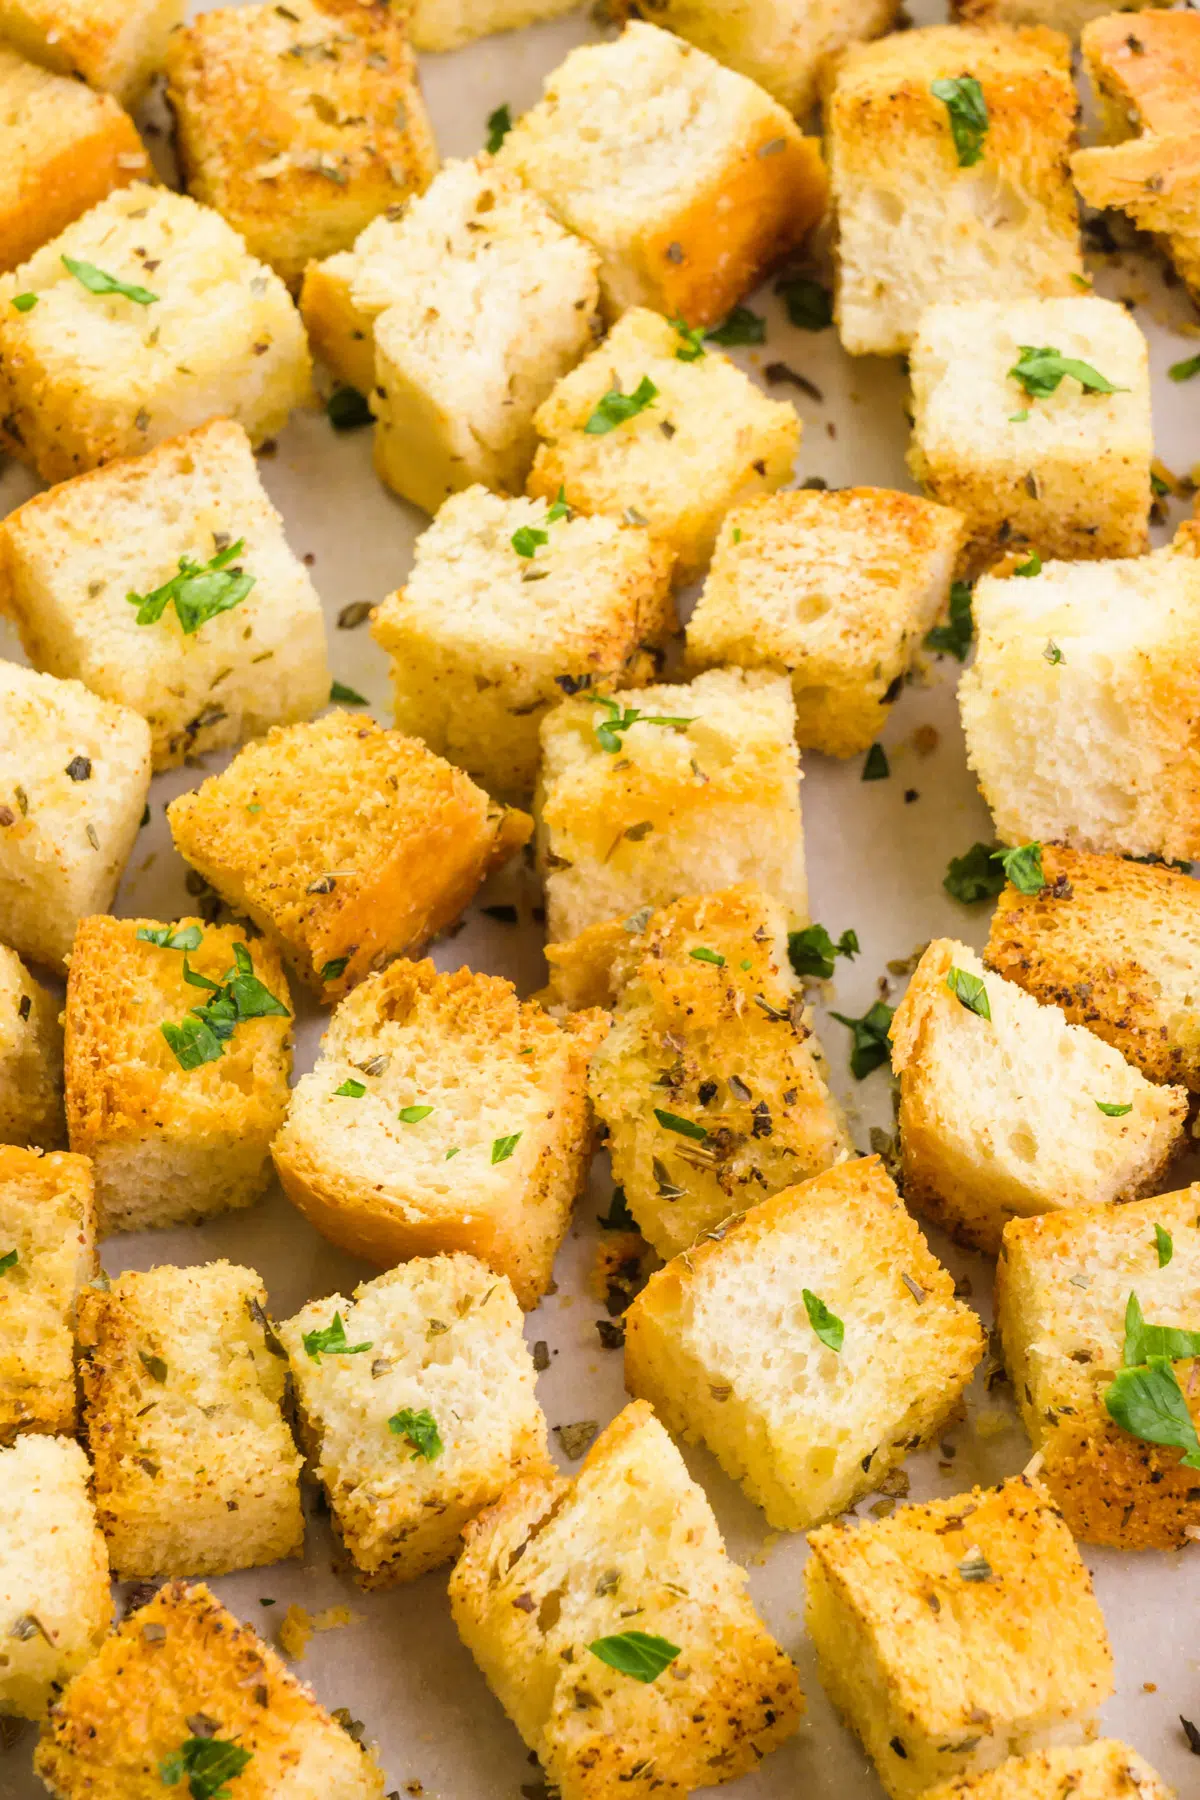 Looking down on a pan with freshly baked croutons.